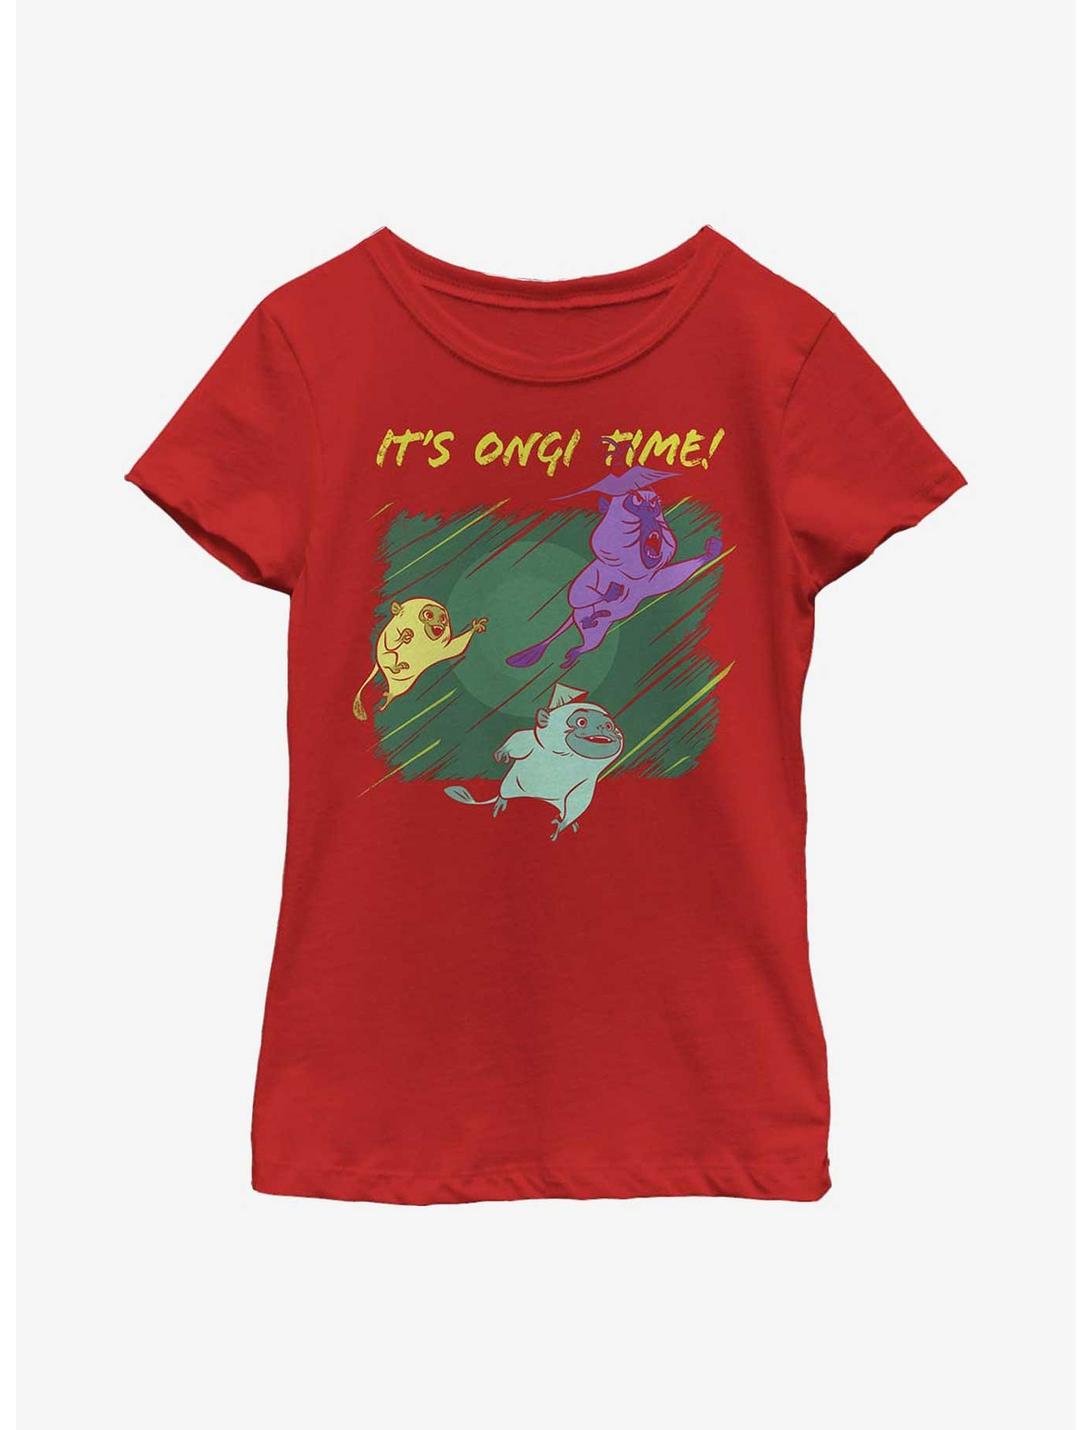 Raya And The Last Dragon Fearless Ongi Trio Youth Girls T-Shirt, RED, hi-res